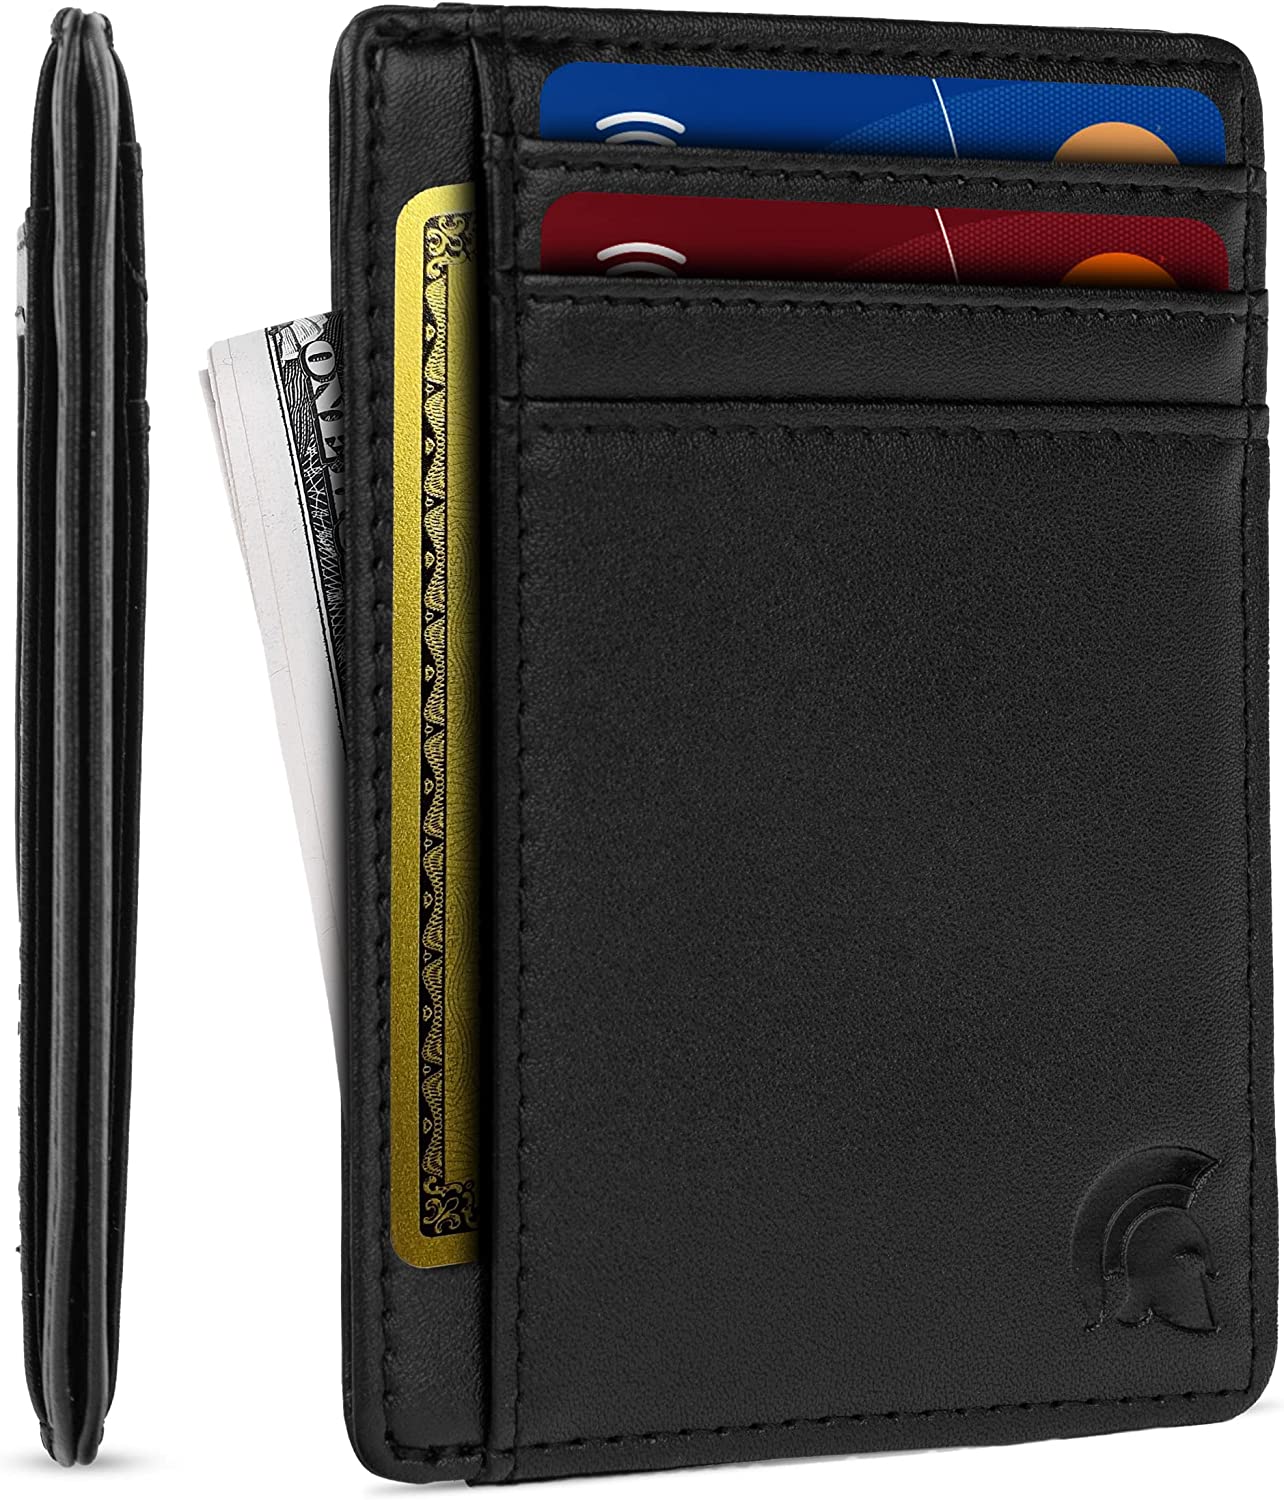 POWR Mens Wallet, Slim RFID Blocking Minimalist Credit Card Holder (Black), Holds up to 7 Cards and Bank Notes, Ideal for Travel